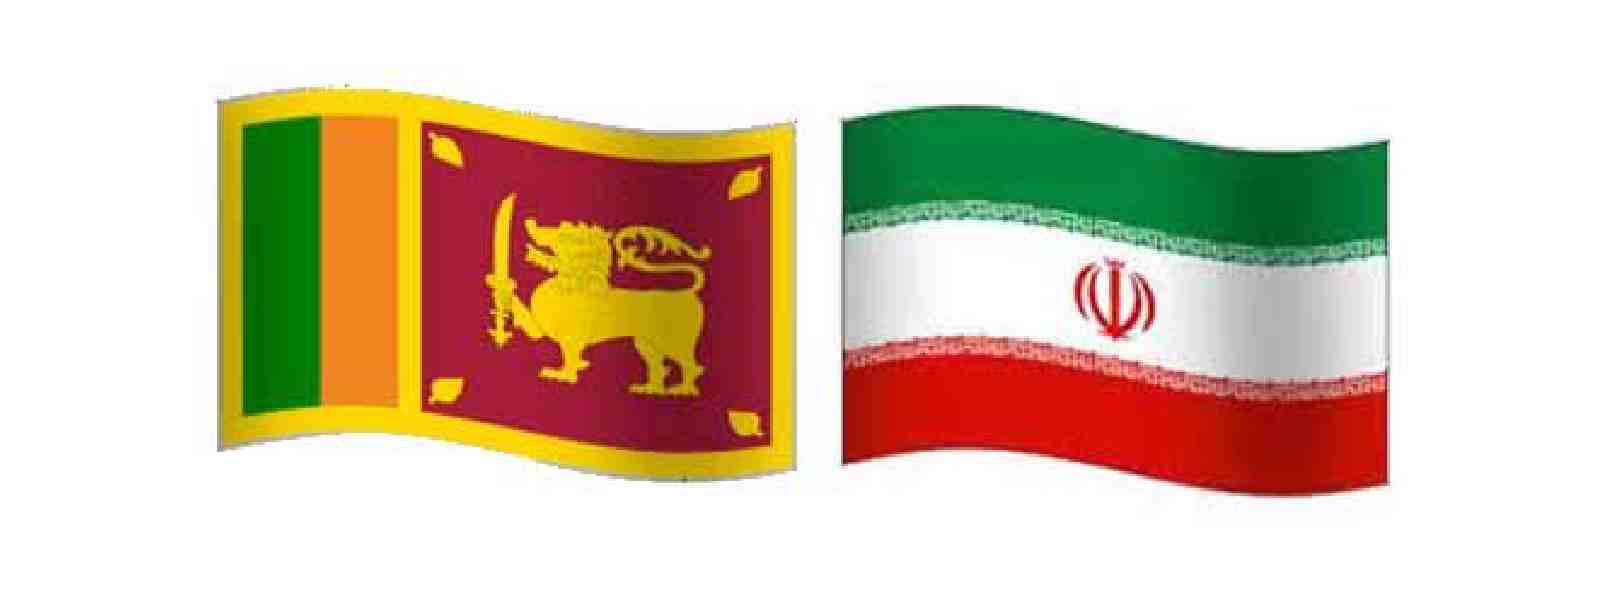 Iran hopes to revive SL cooperation commission